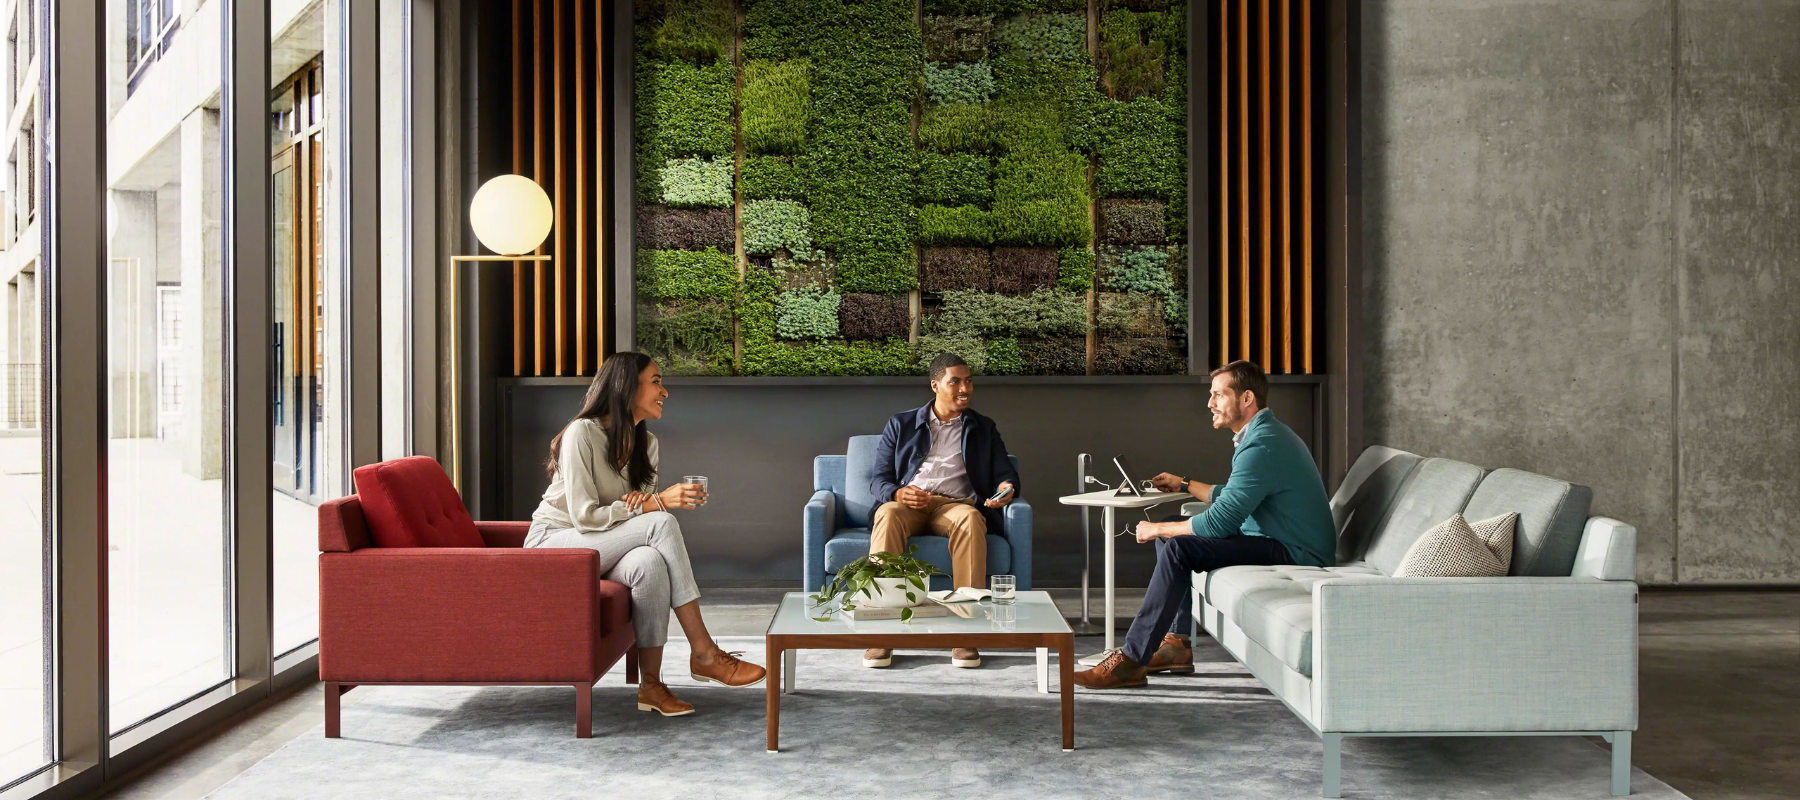 three people sitting at sofas in a residential-inspired workplace setting